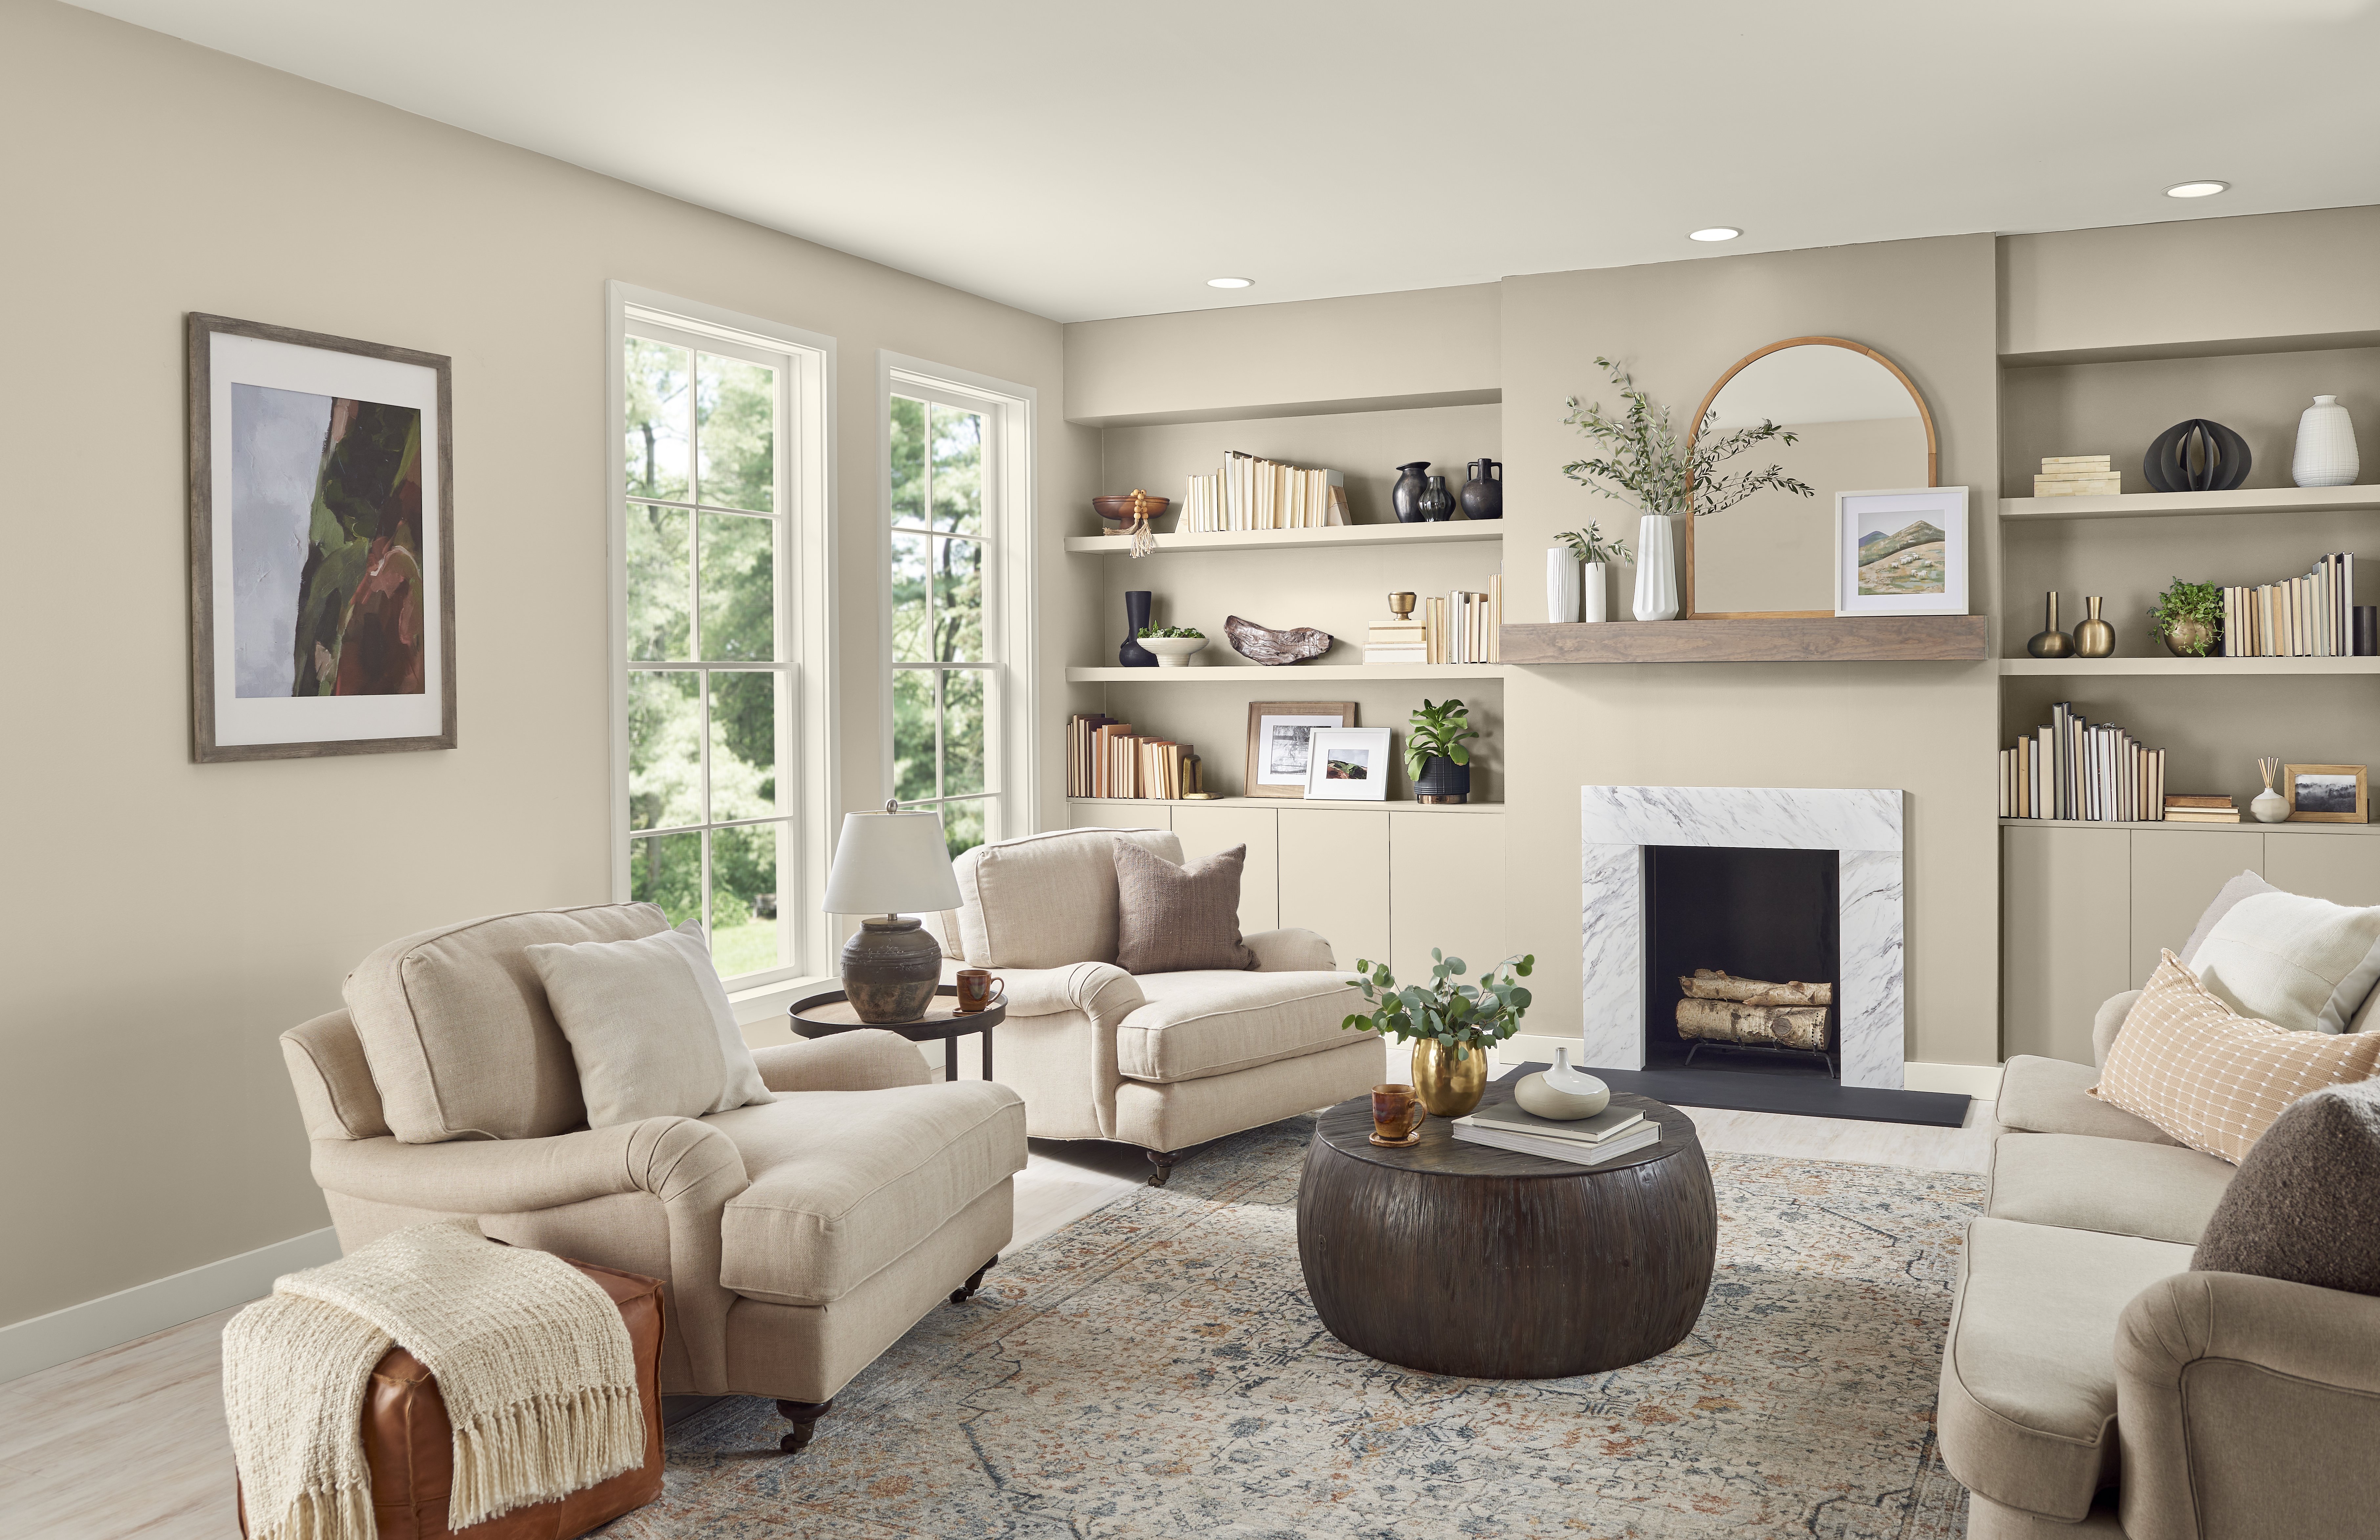 A cozy living room with walls and built-in shelves painted in Even Better Beige, surrounded by matching neutral furniture pieces.